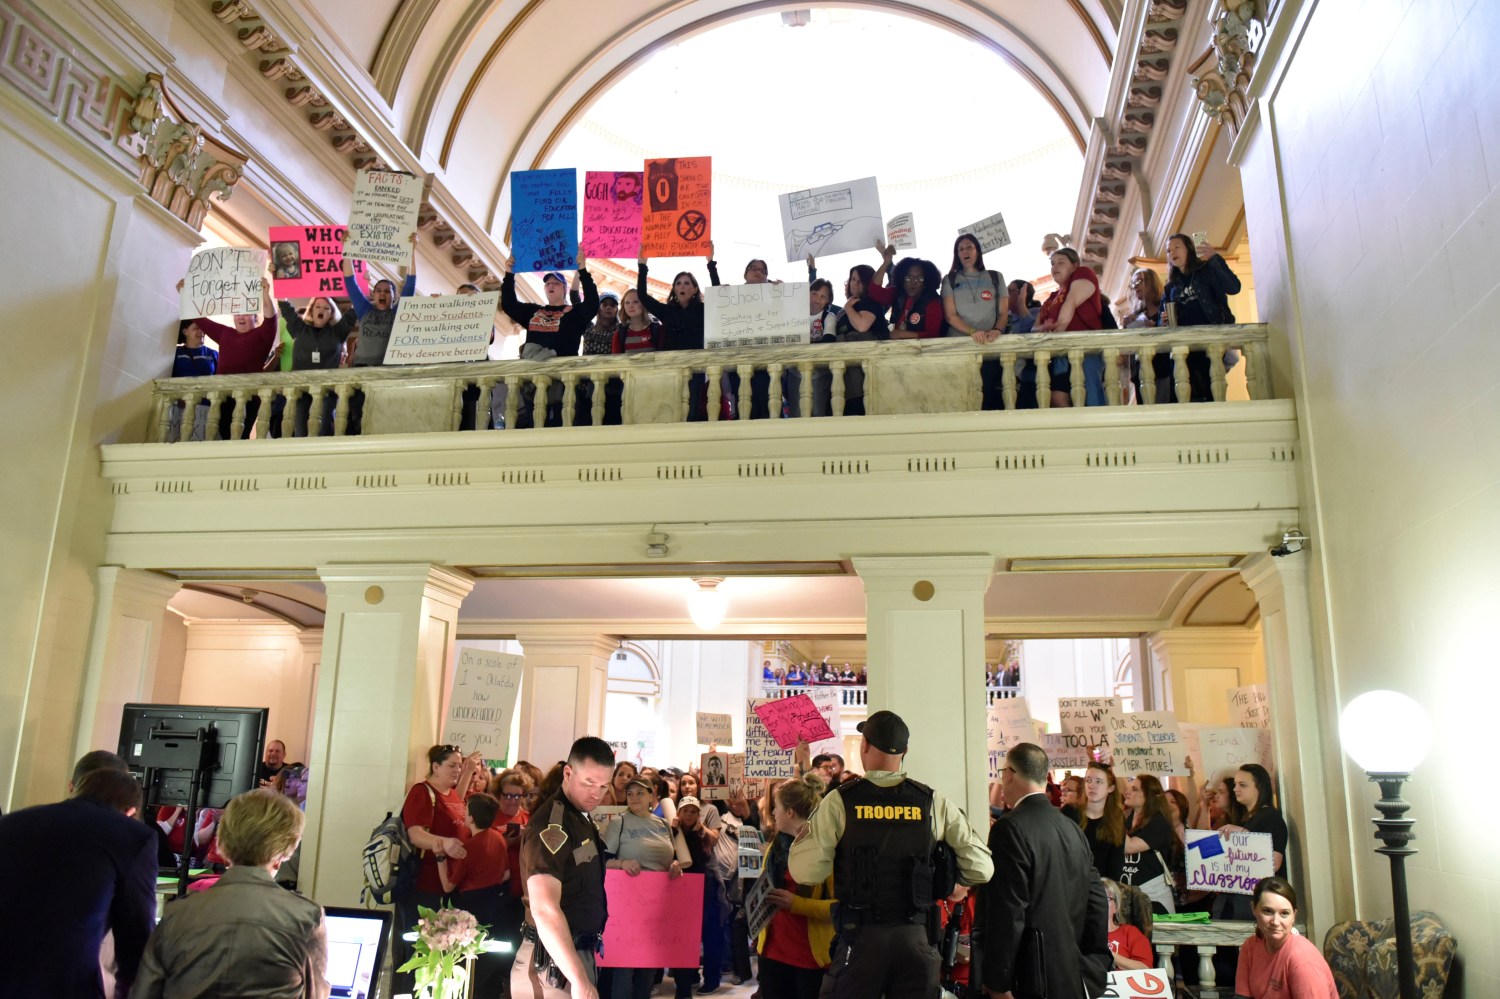 Teachers chant outside of the House of Representatives at the Capitol on the second day of a teacher walkout to demand higher pay and more funding for education in Oklahoma City